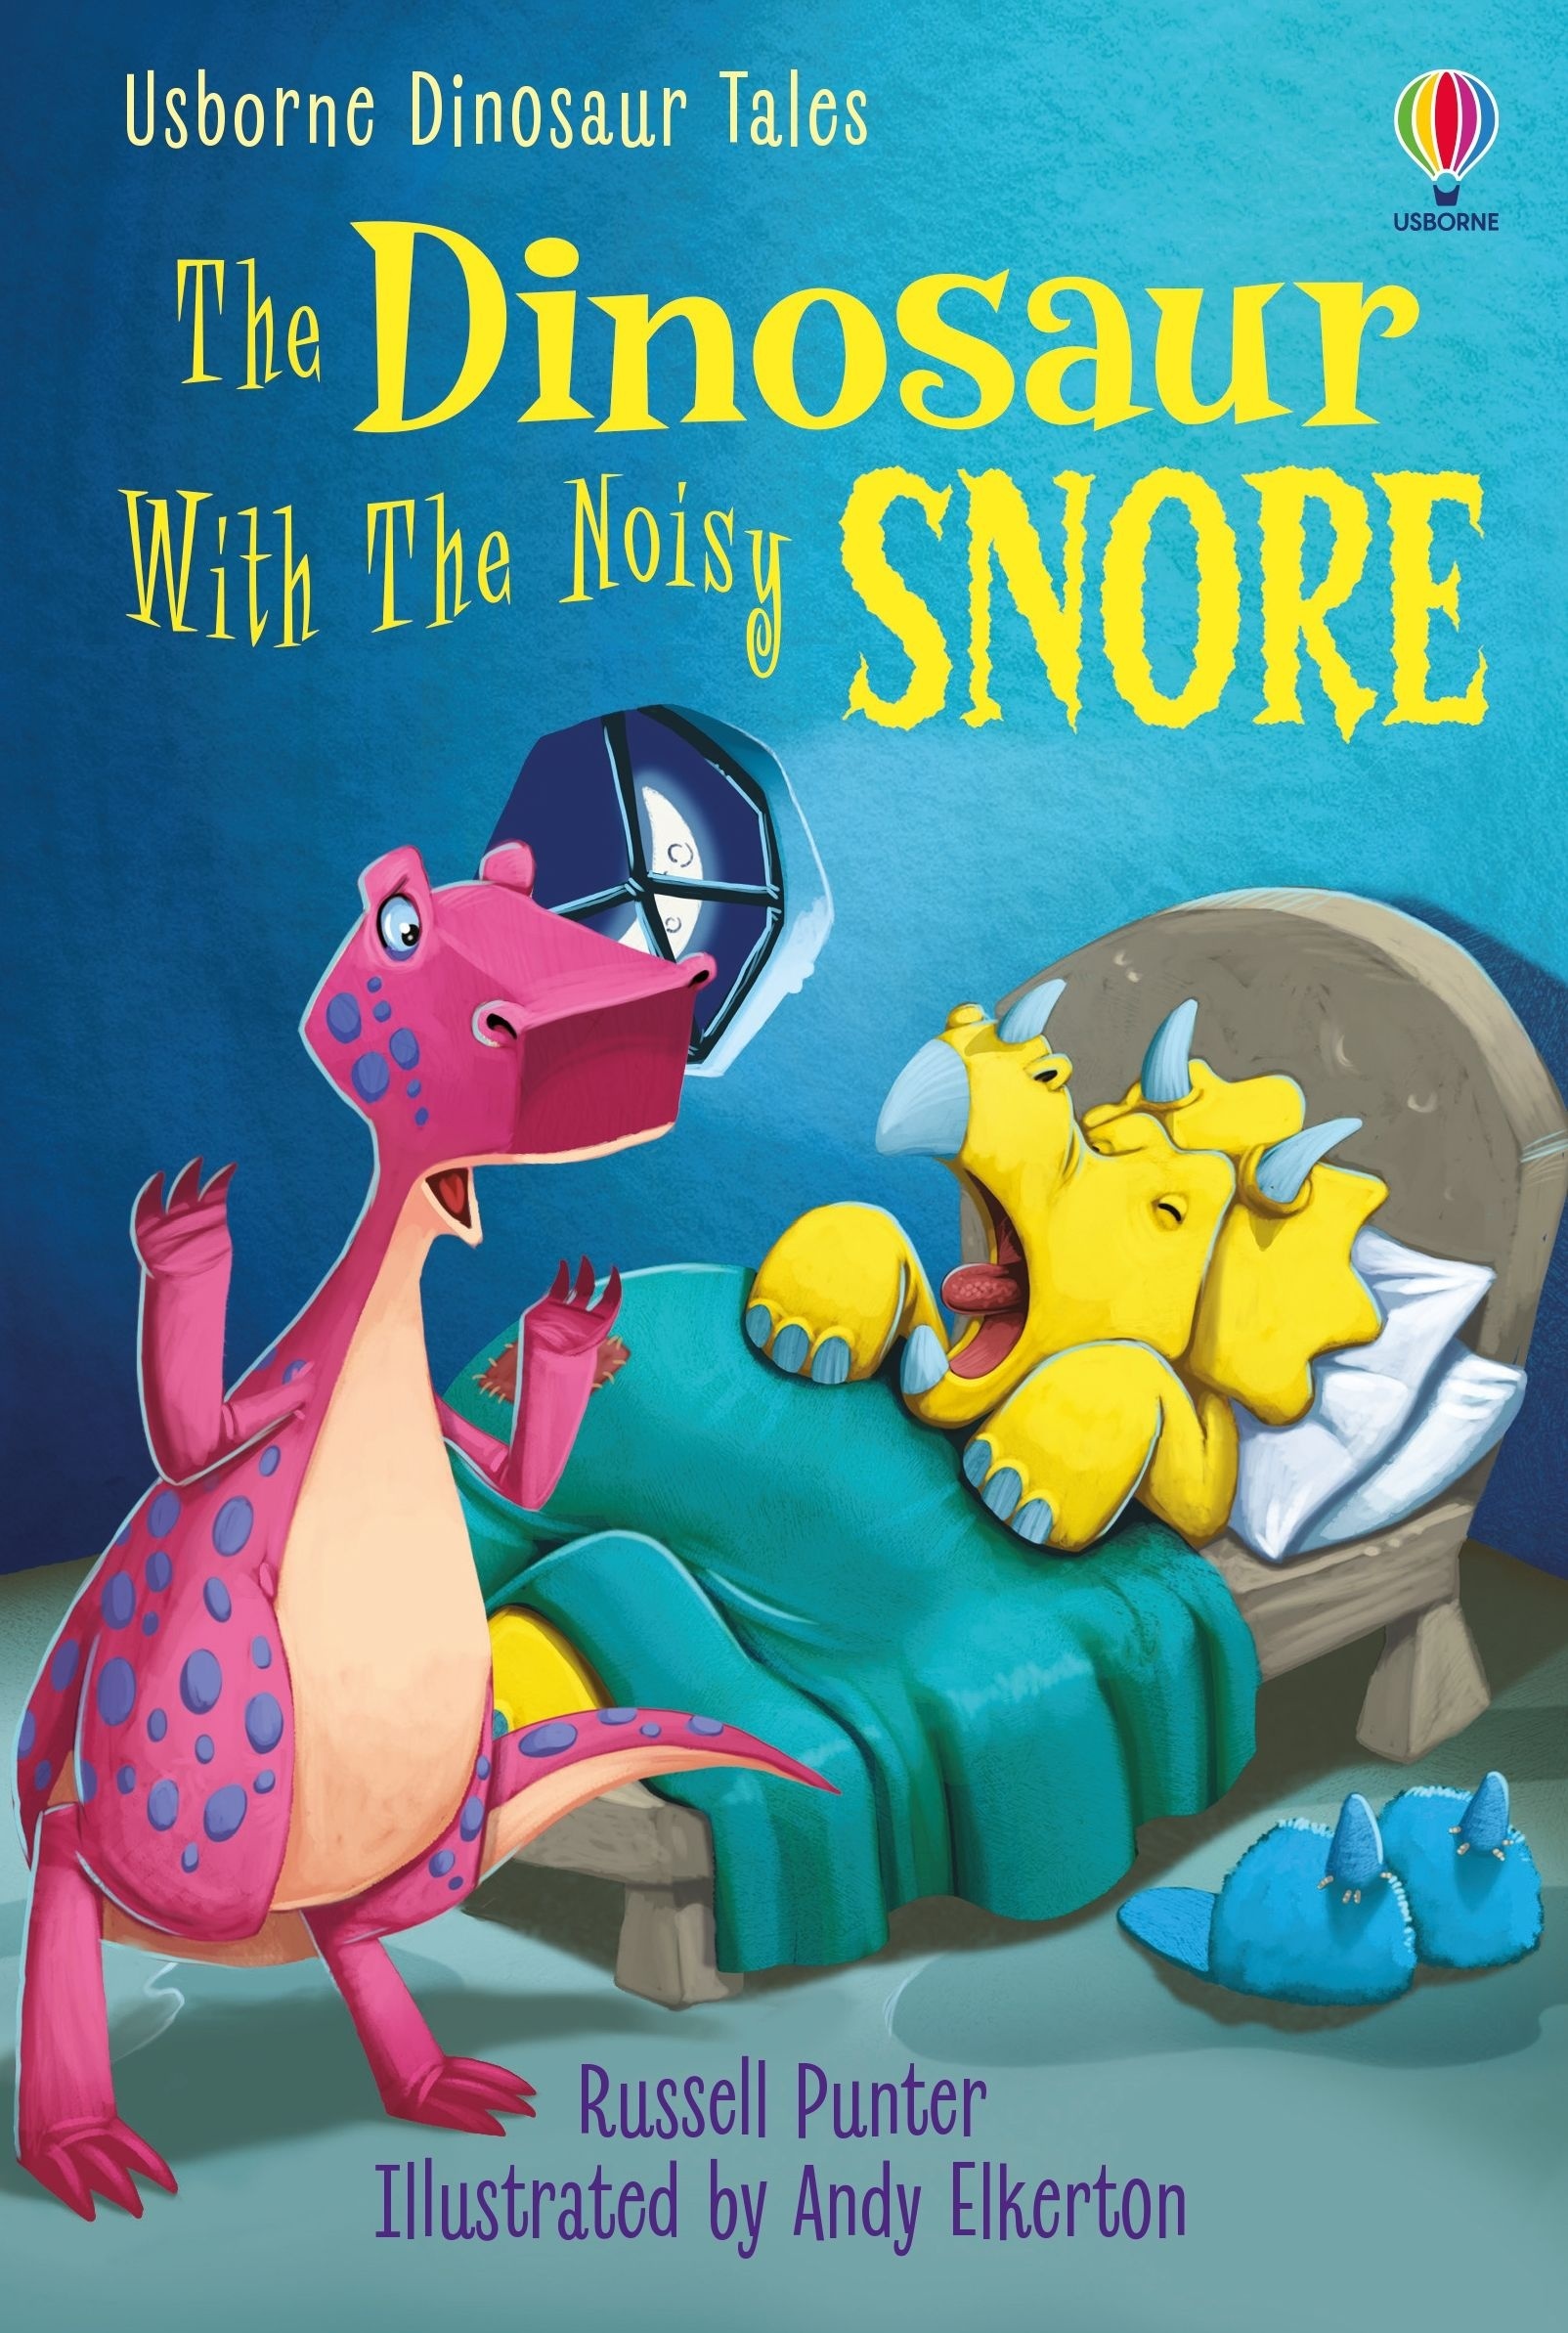 Dinosaur Tales: The Dinosaur With the Noisy Snore